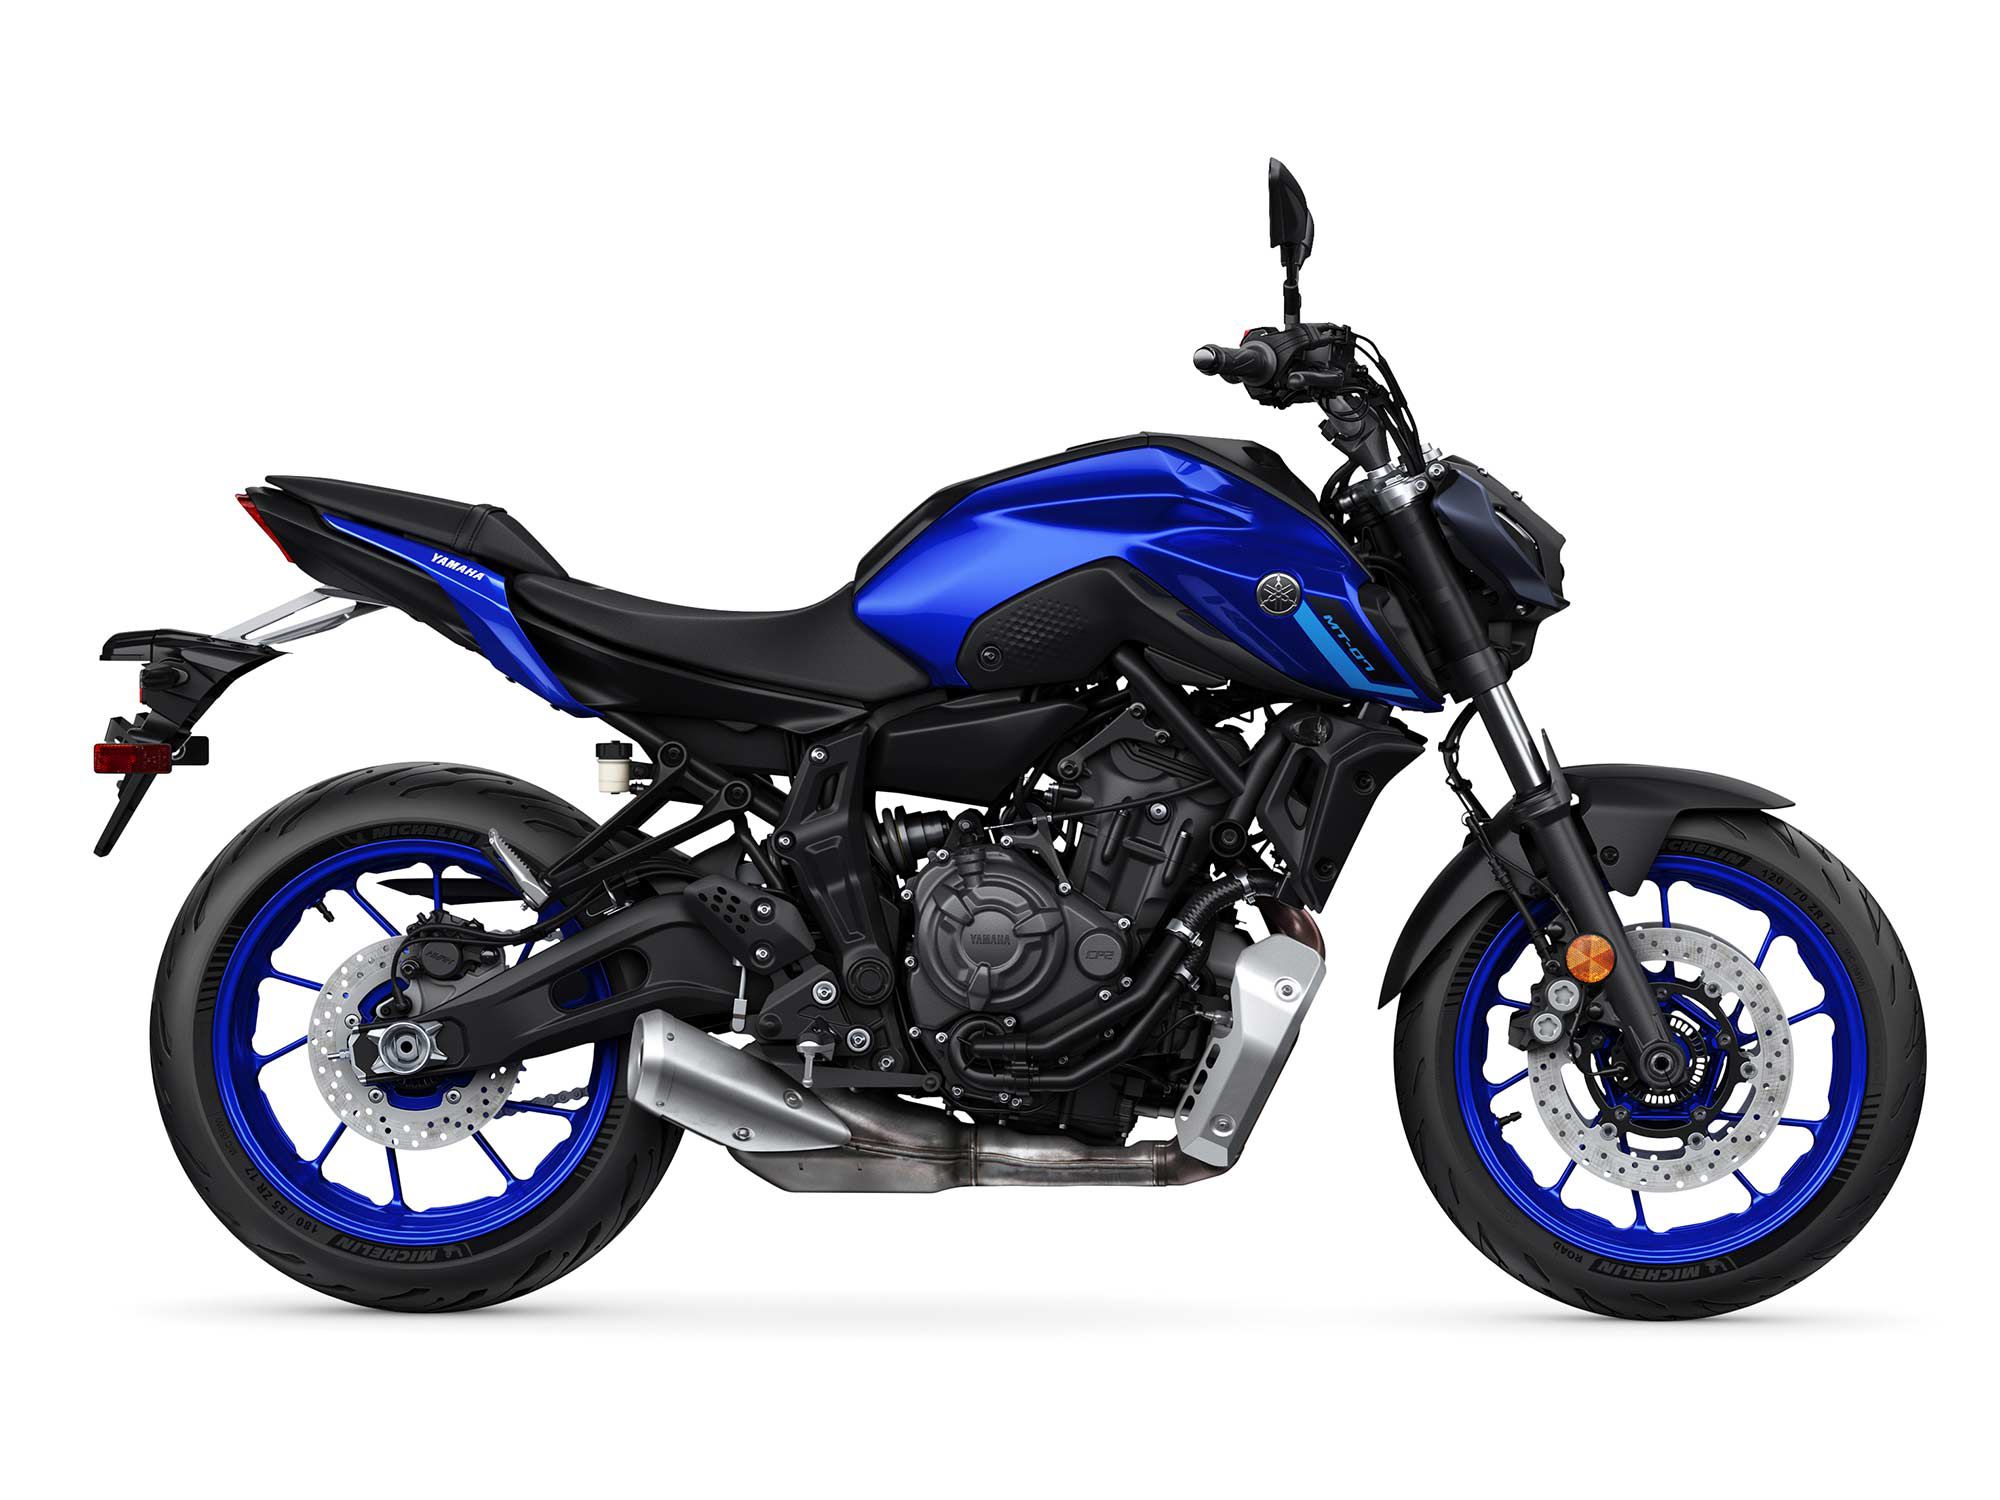 The 2023 Yamaha MT-07. The combination of simple design and character-rich engine makes for a great mid-displacement offering.